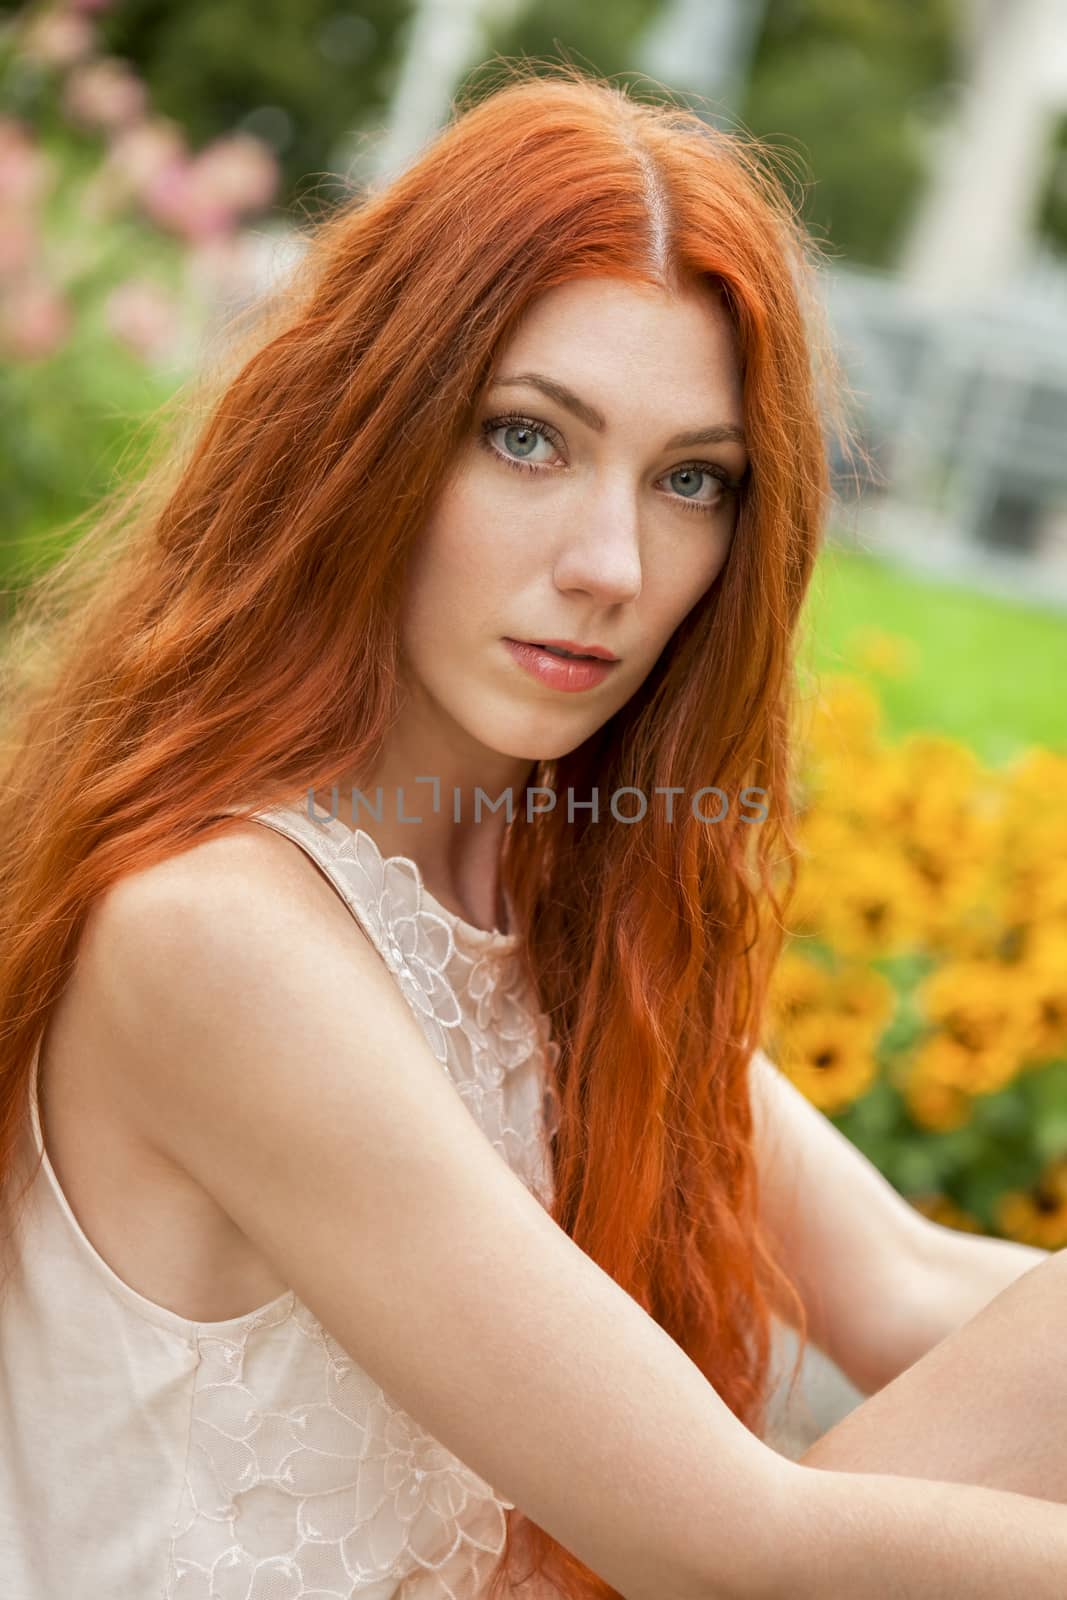 Close up Gorgeous Young Woman with Long Blond Hair, Posing at the Garden While Looking at Camera